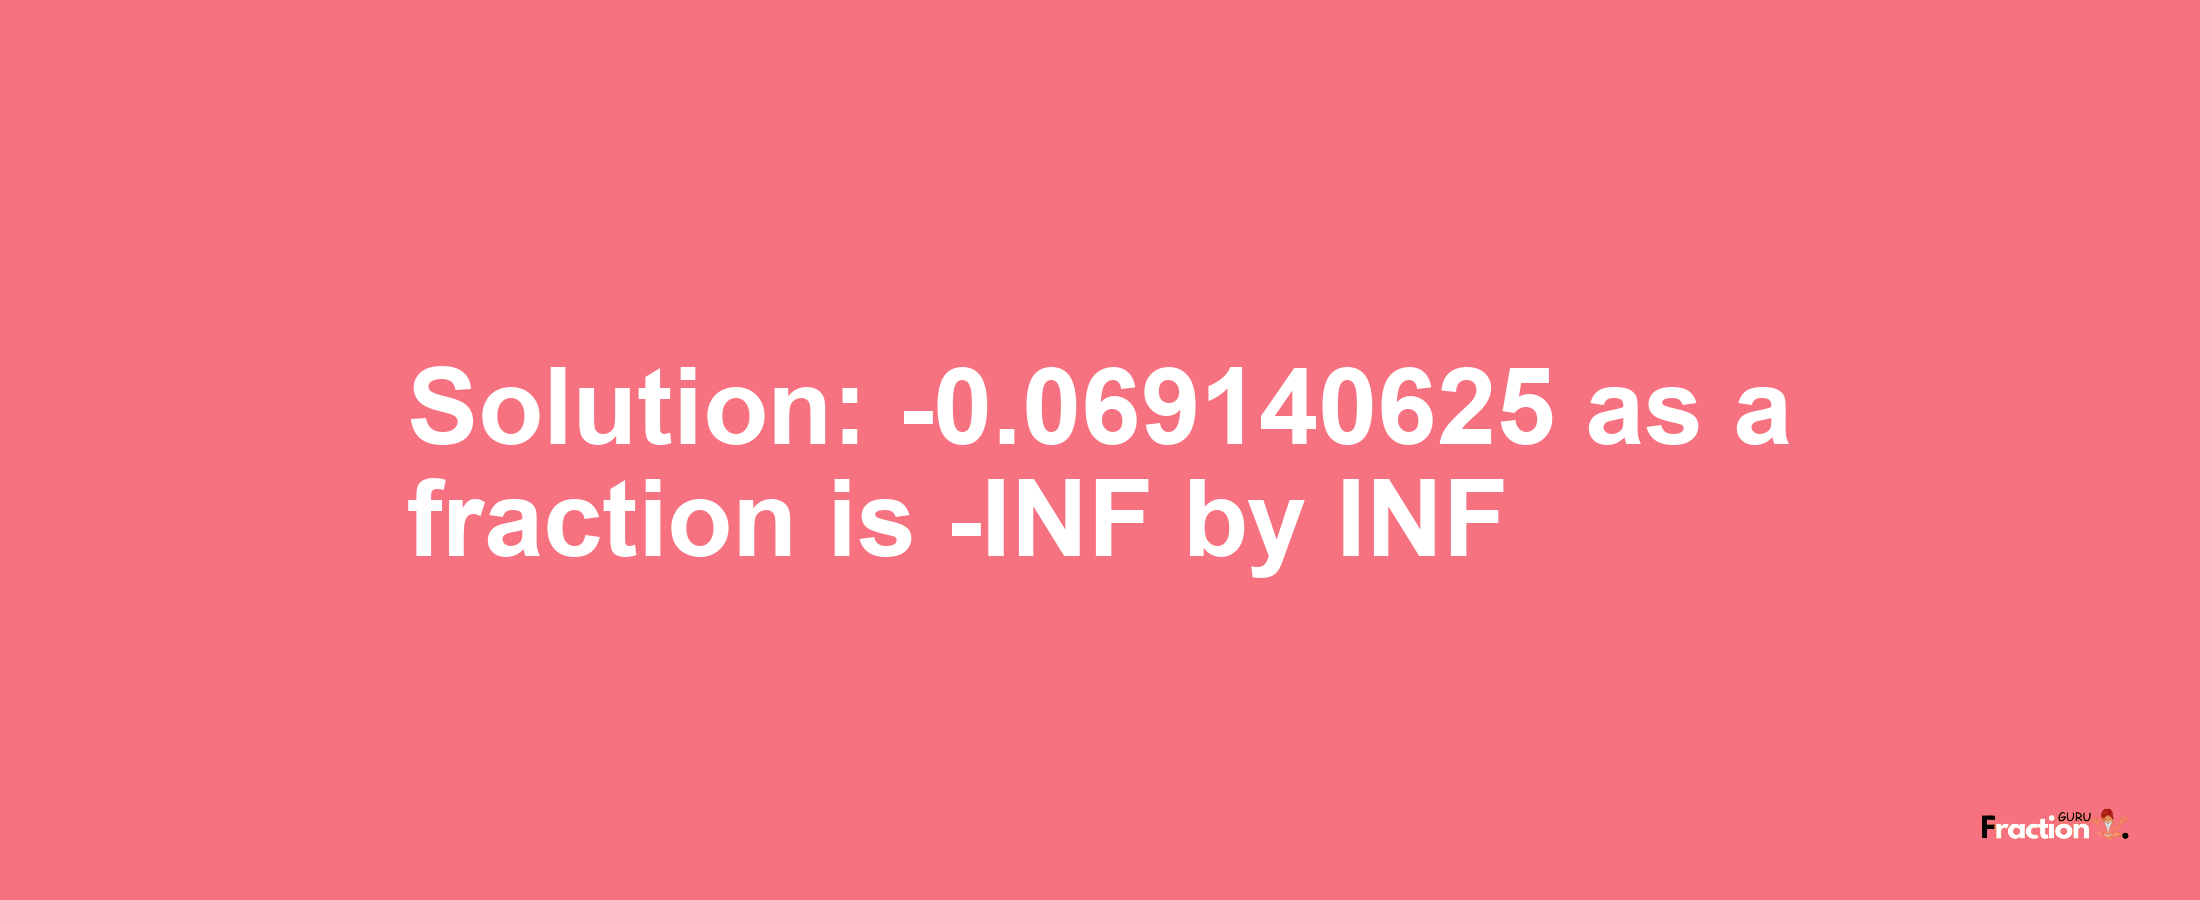 Solution:-0.069140625 as a fraction is -INF/INF